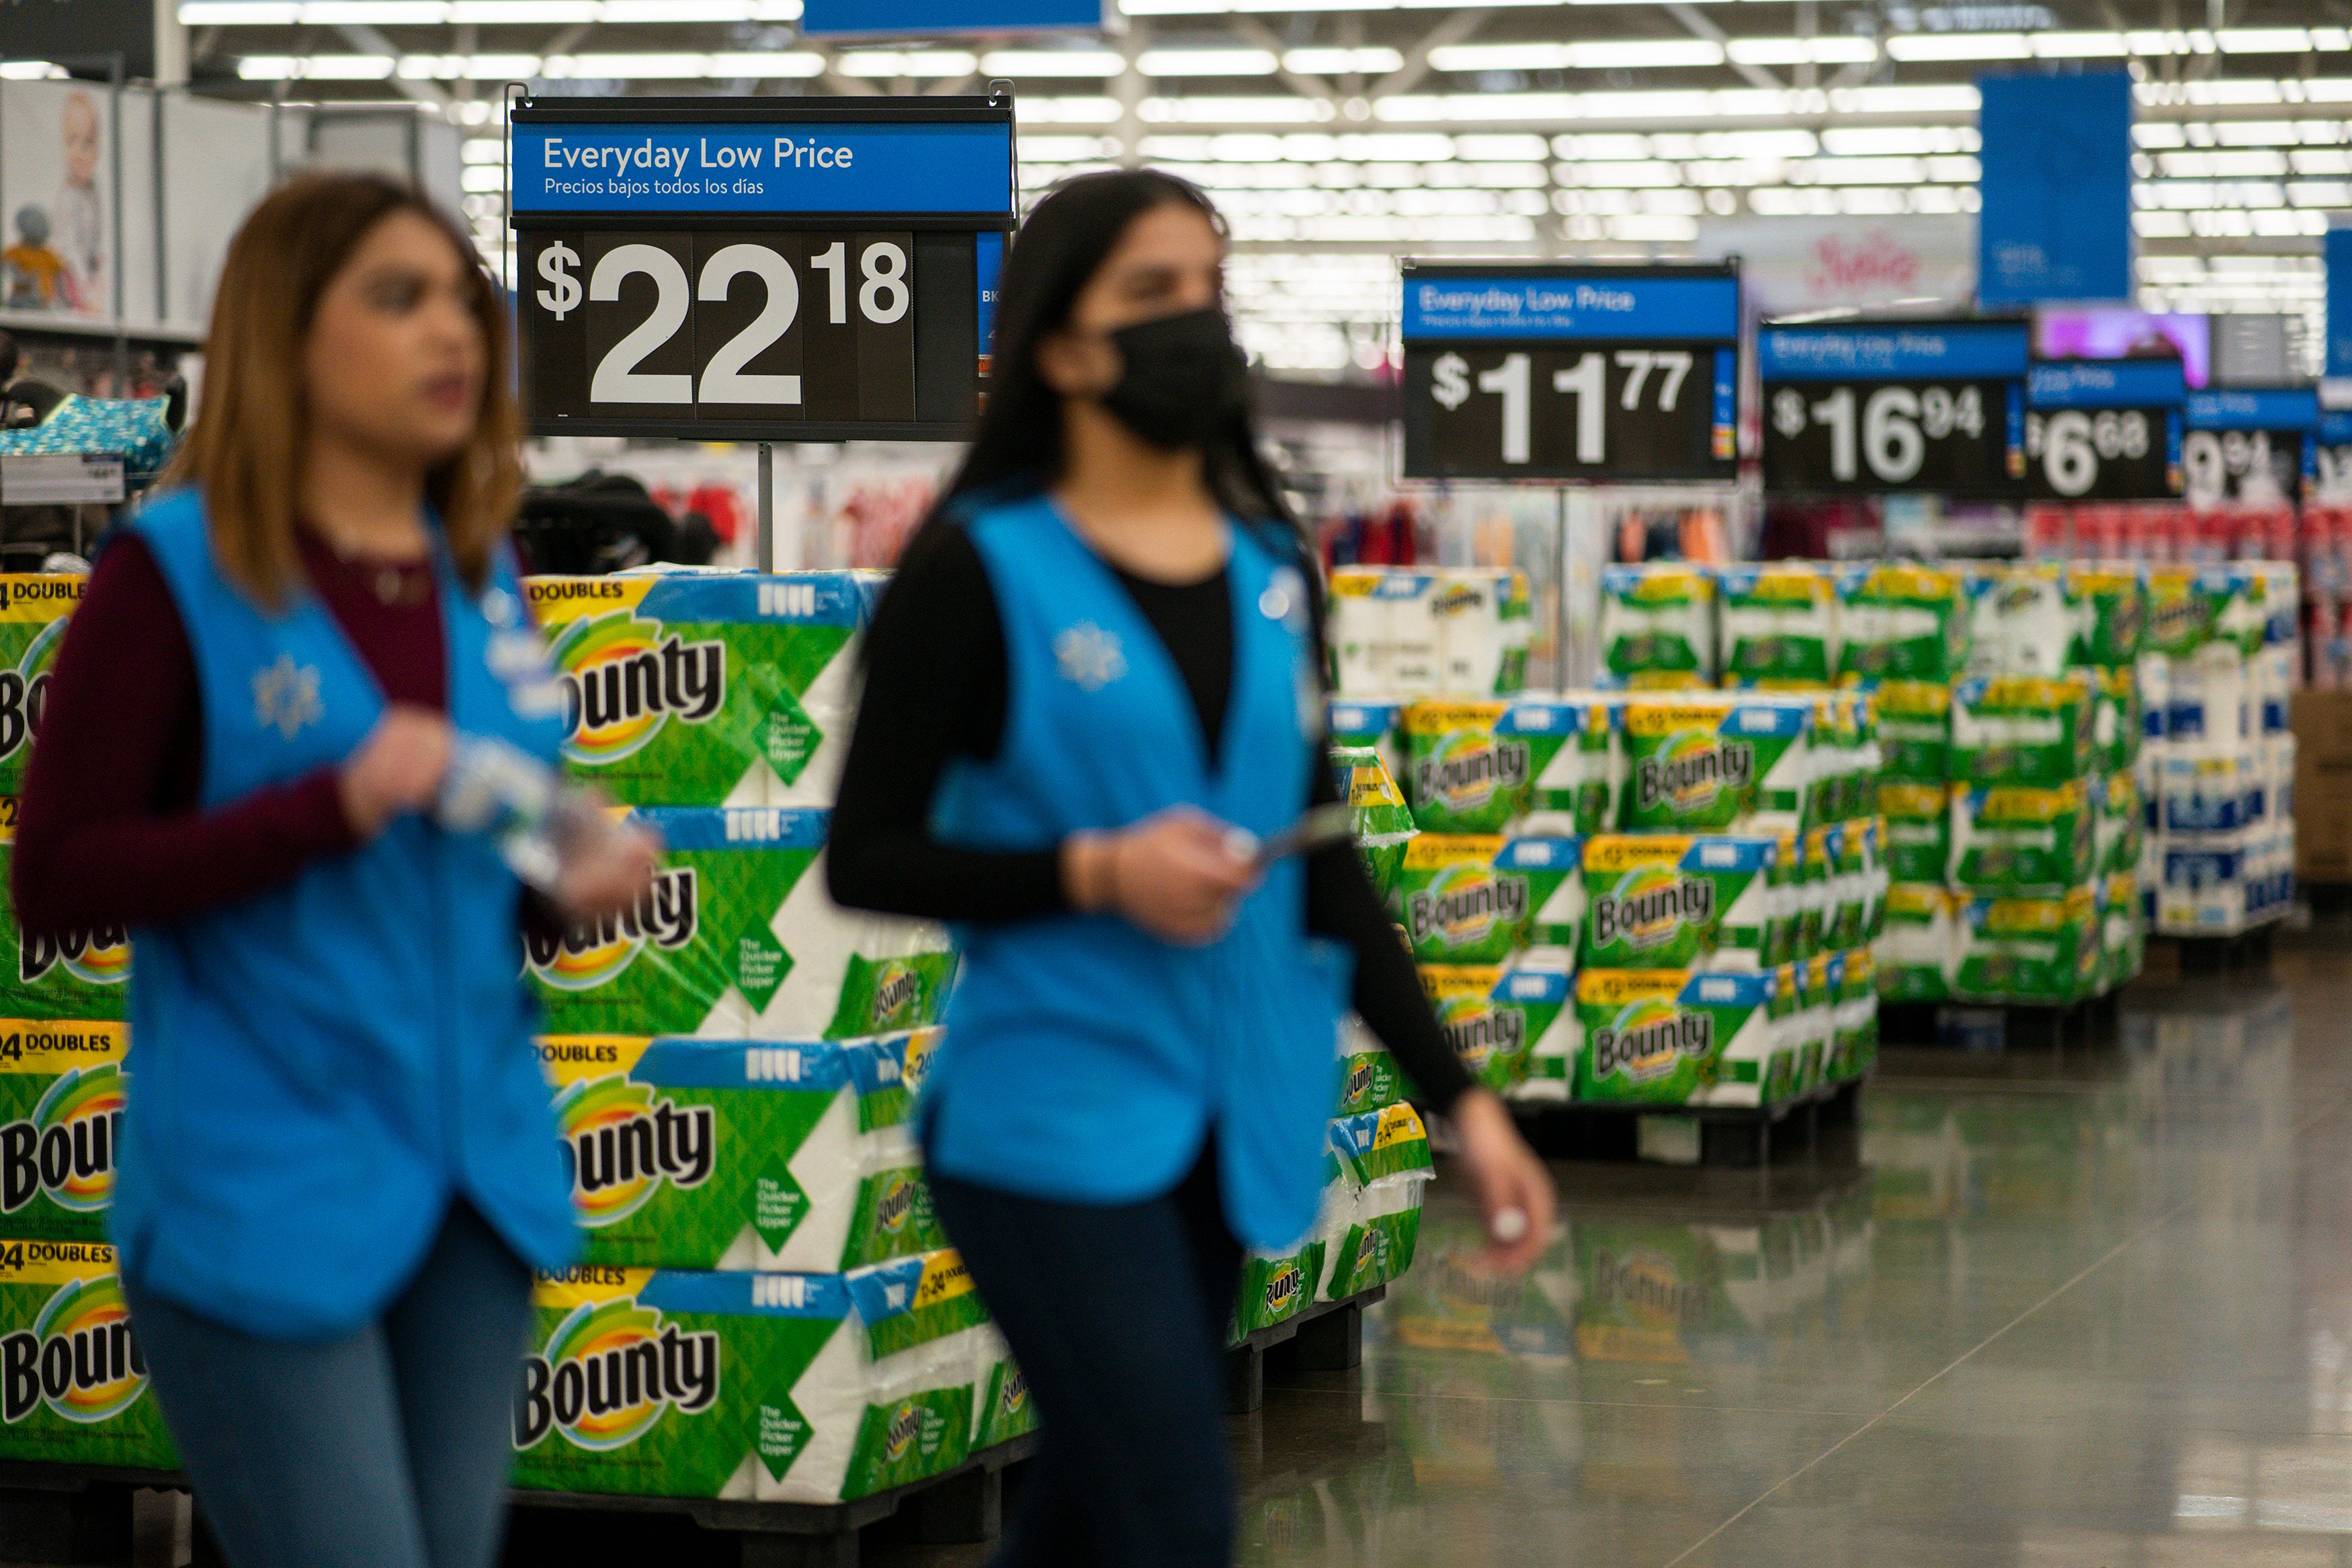 Prices are displayed over items at a Walmart Supercenter in North Bergen, N.J. on Feb. 9, 2023